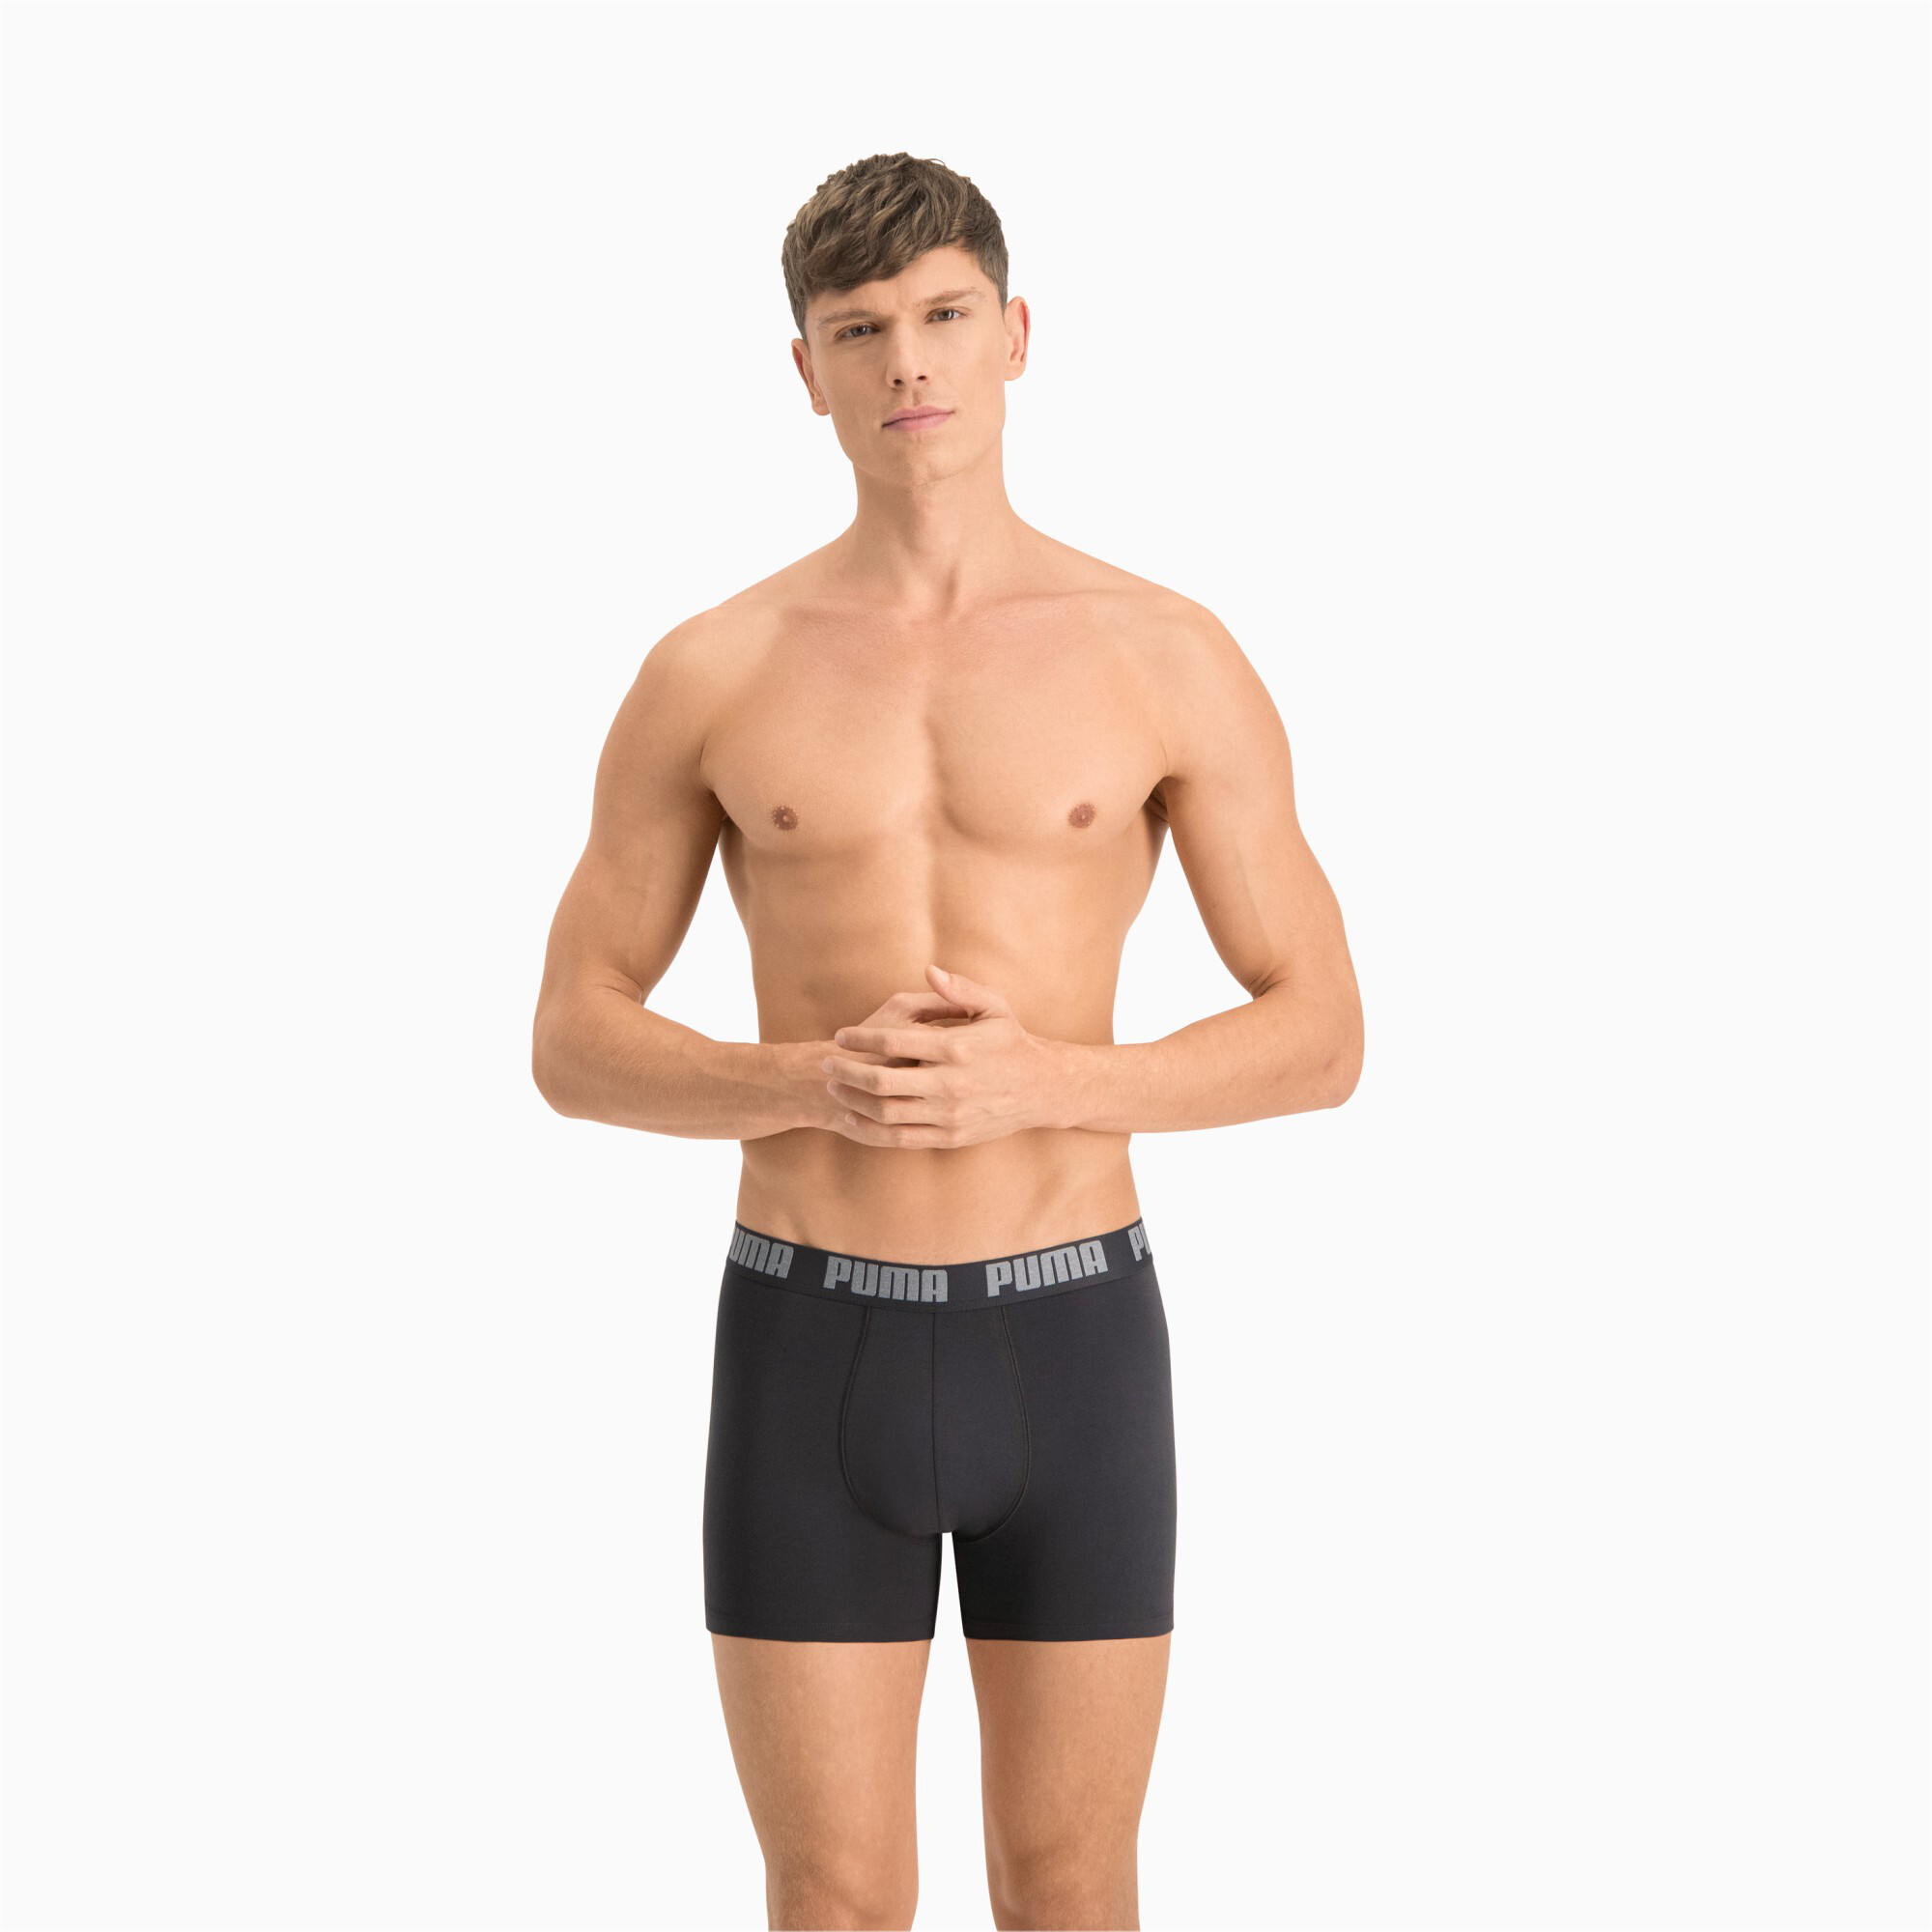 Men's PUMA Basic Boxers 2 Pack In Gray, Size Large